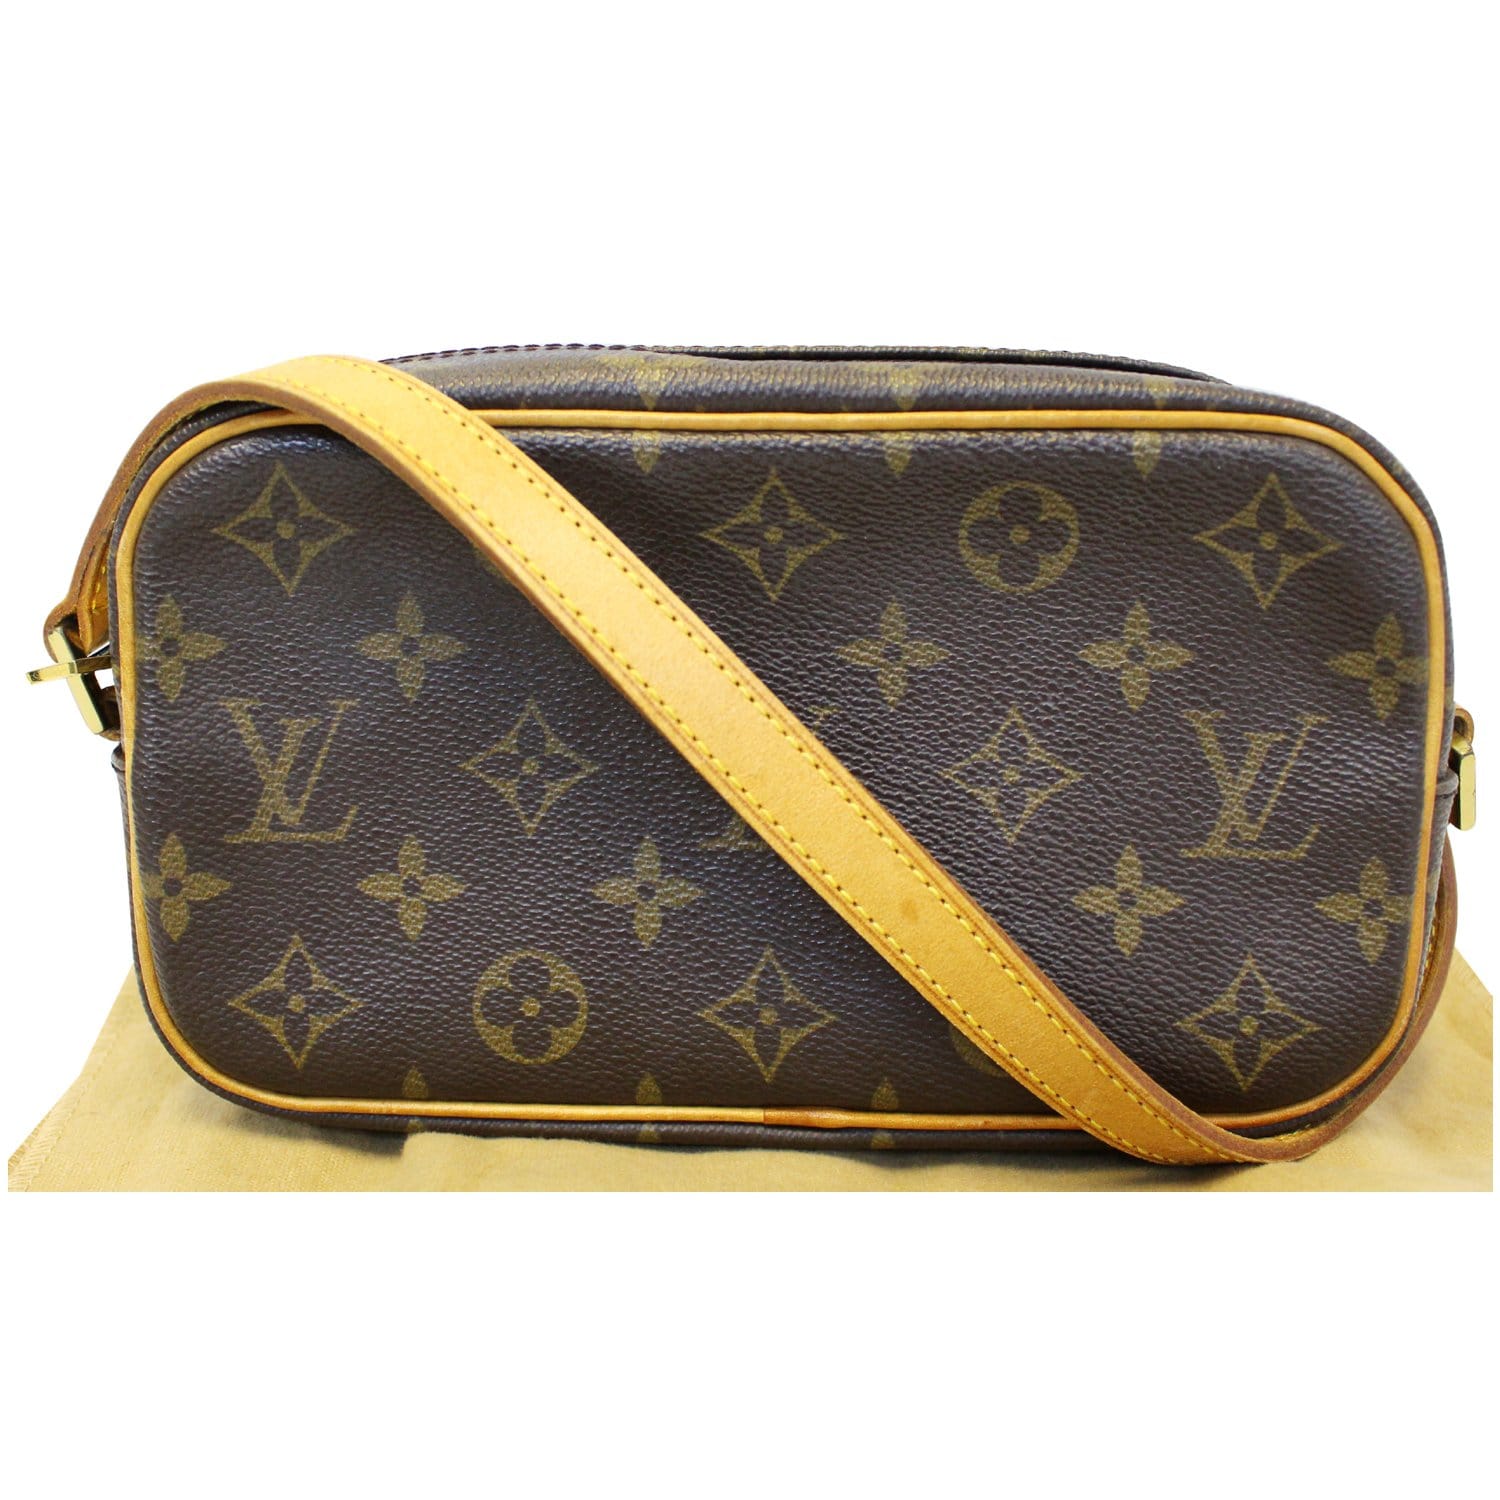 SOLD OUT - Louis Vuitton Vintage monogram Pochette Cite This item is only  available at the store but we accept the order by DM. Please DM…